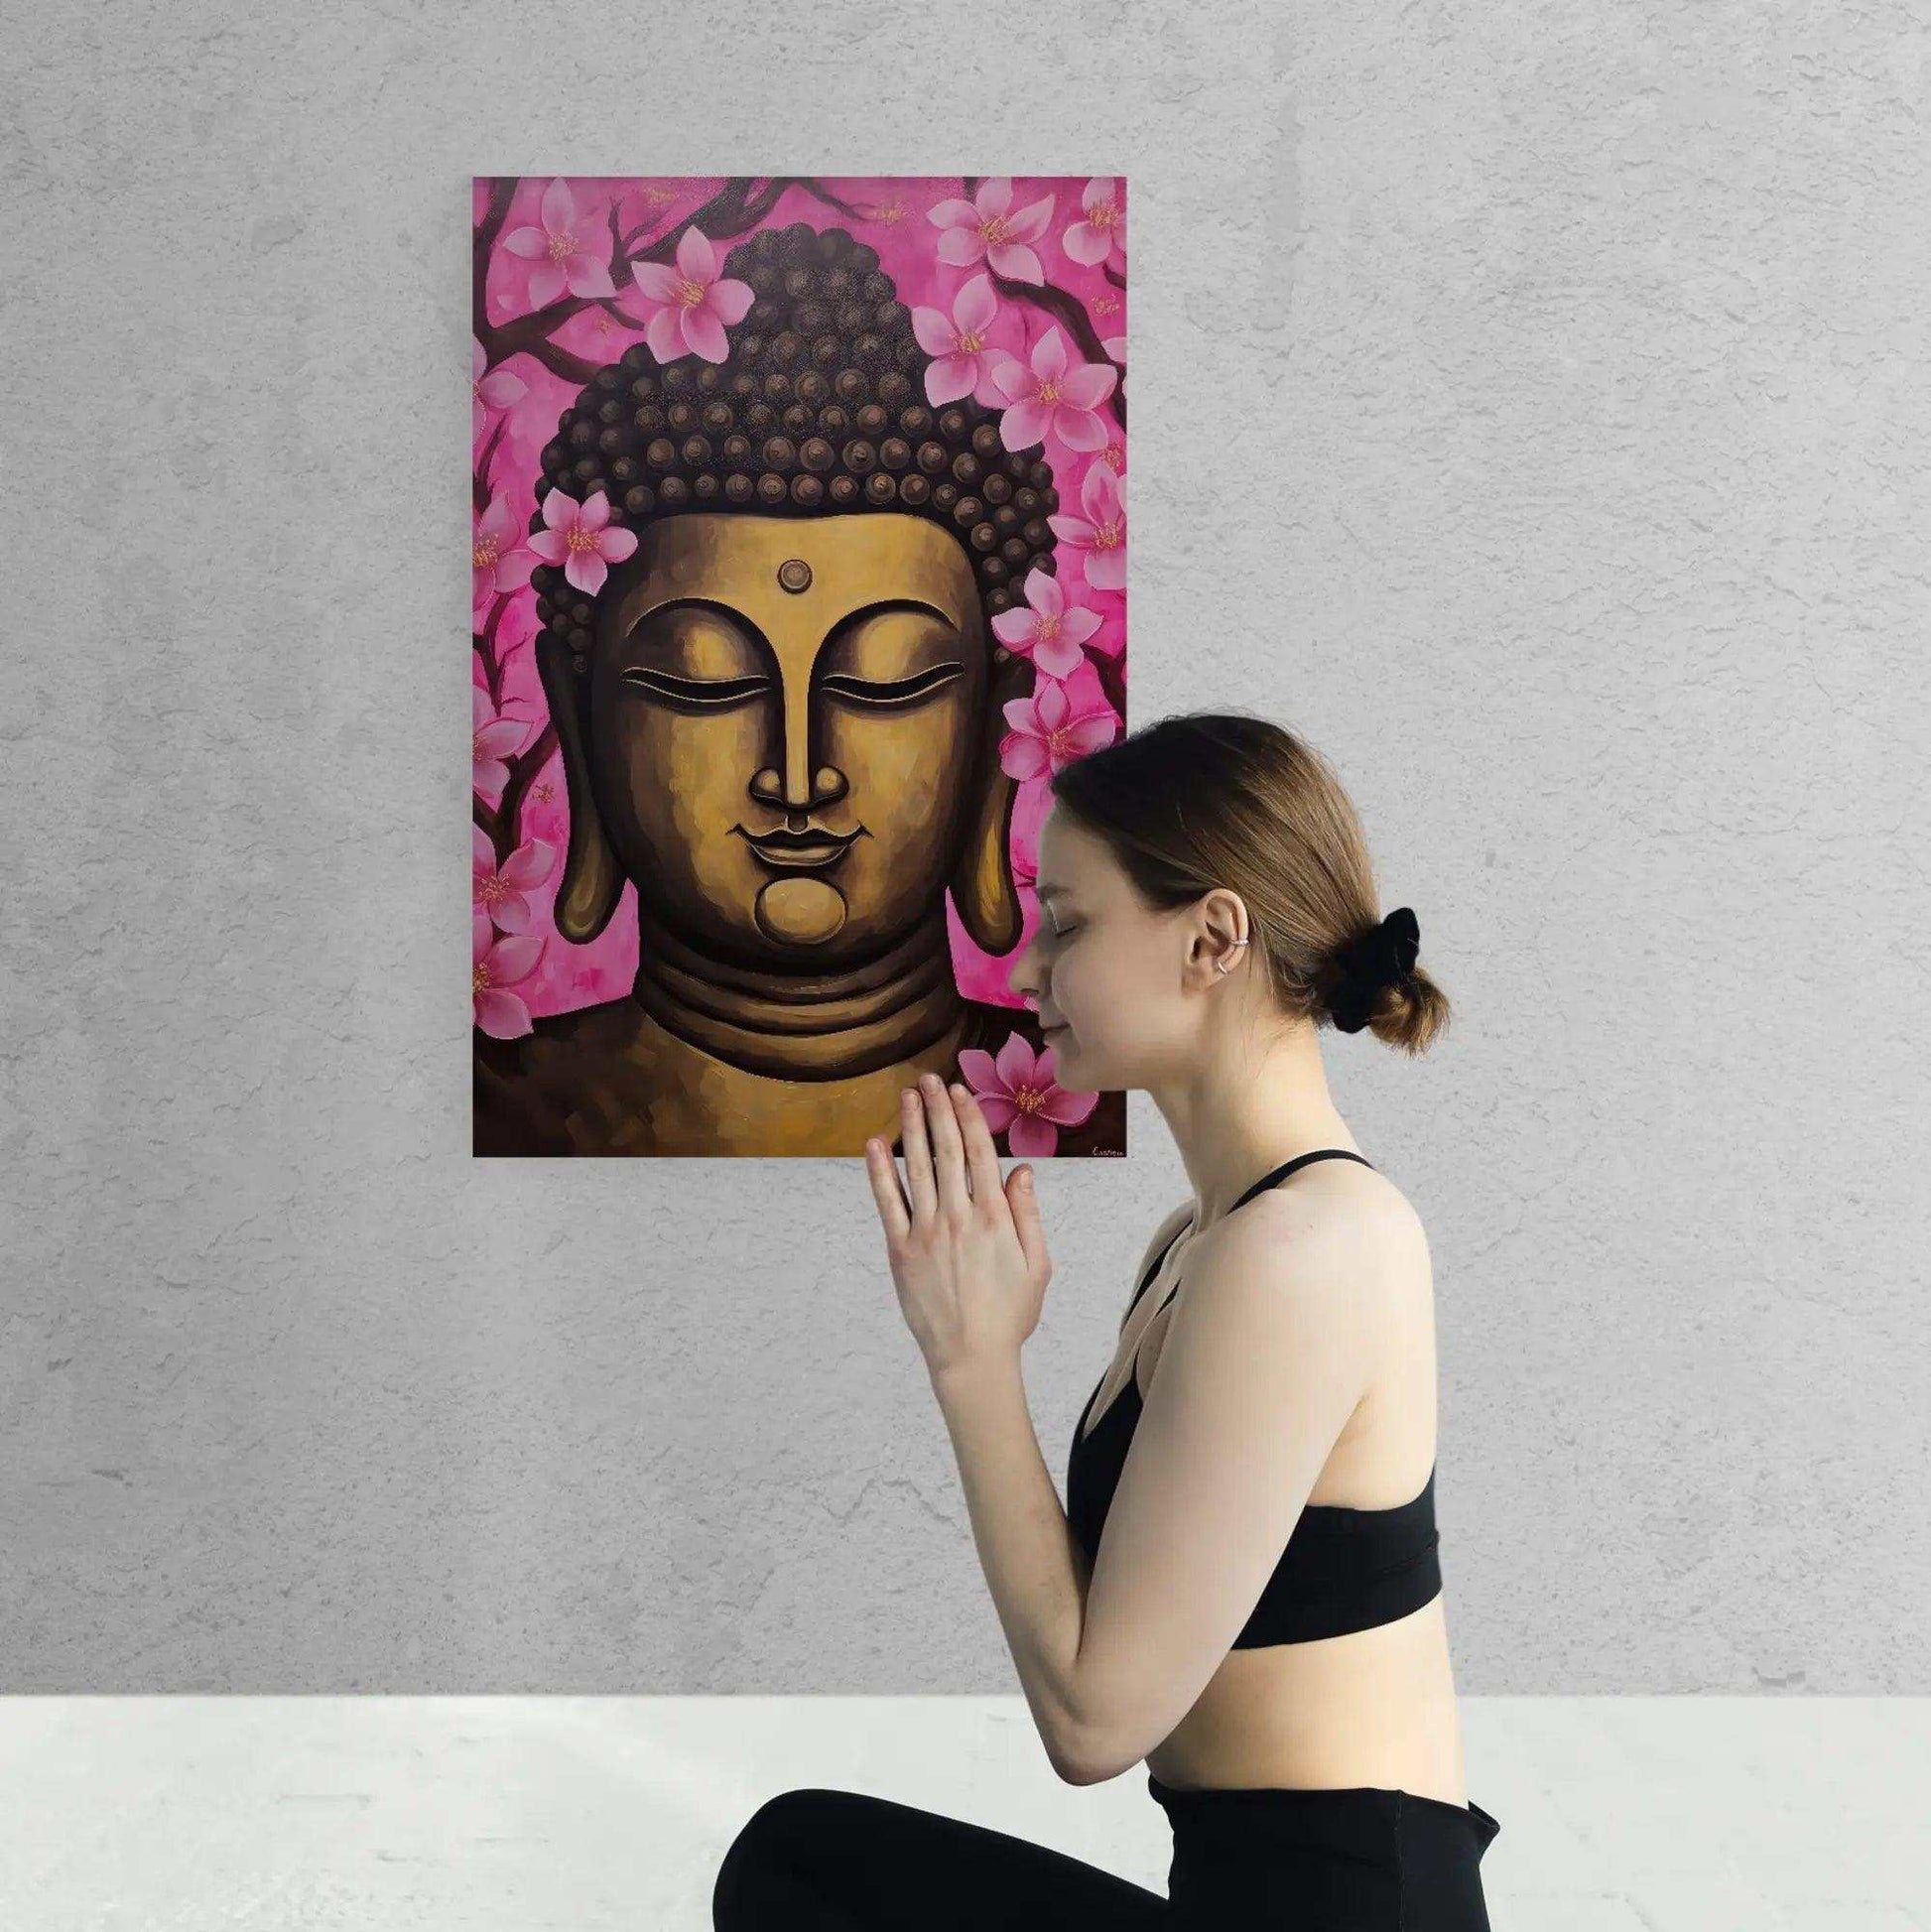 A woman in workout attire kneels and presses her hands together in a gesture of prayer or meditation before a portrait of Buddha framed by vibrant pink cherry blossoms. The artwork features warm golden and brown hues, creating a peaceful and contemplative atmosphere against the textured white wall.